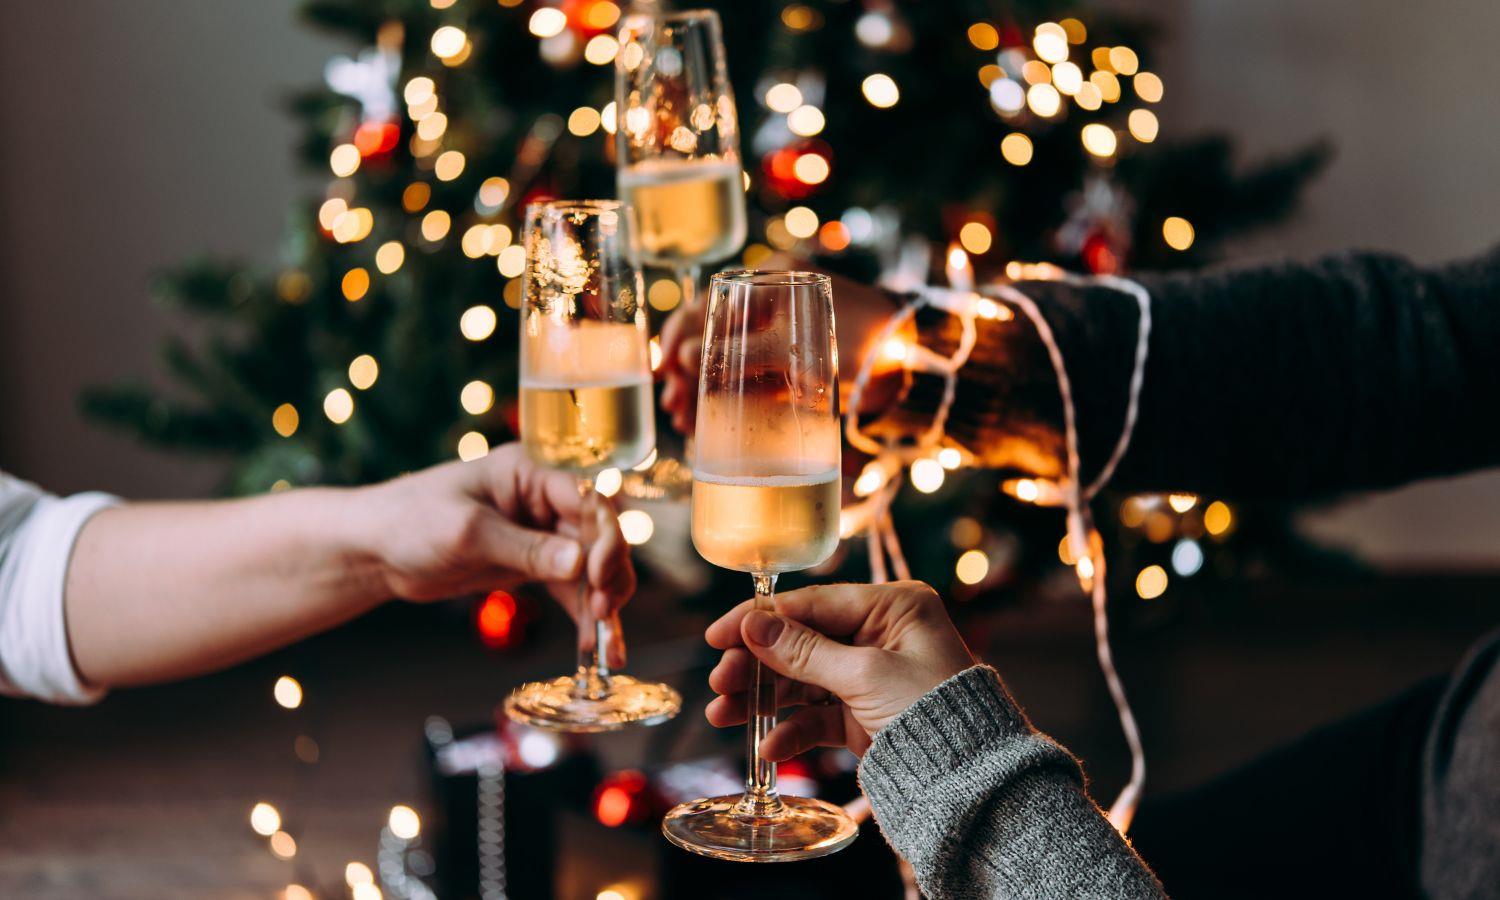 A cheers with glasses of Champagne in front of a Christmas tree